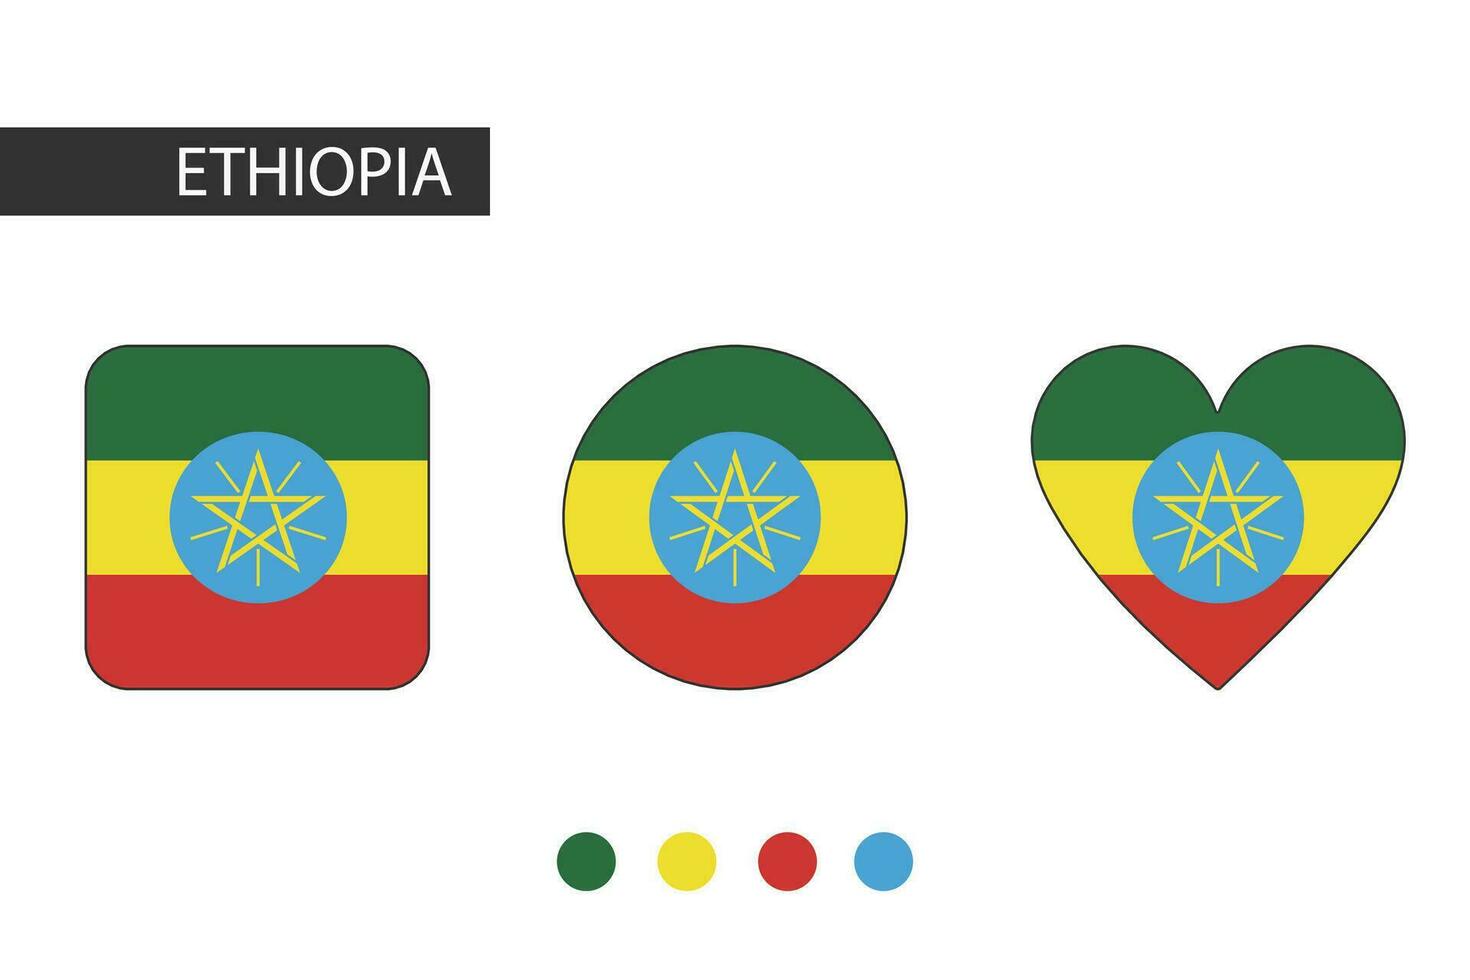 Ethiopia 3 shapes square, circle, heart with city flag. Isolated on white background. vector